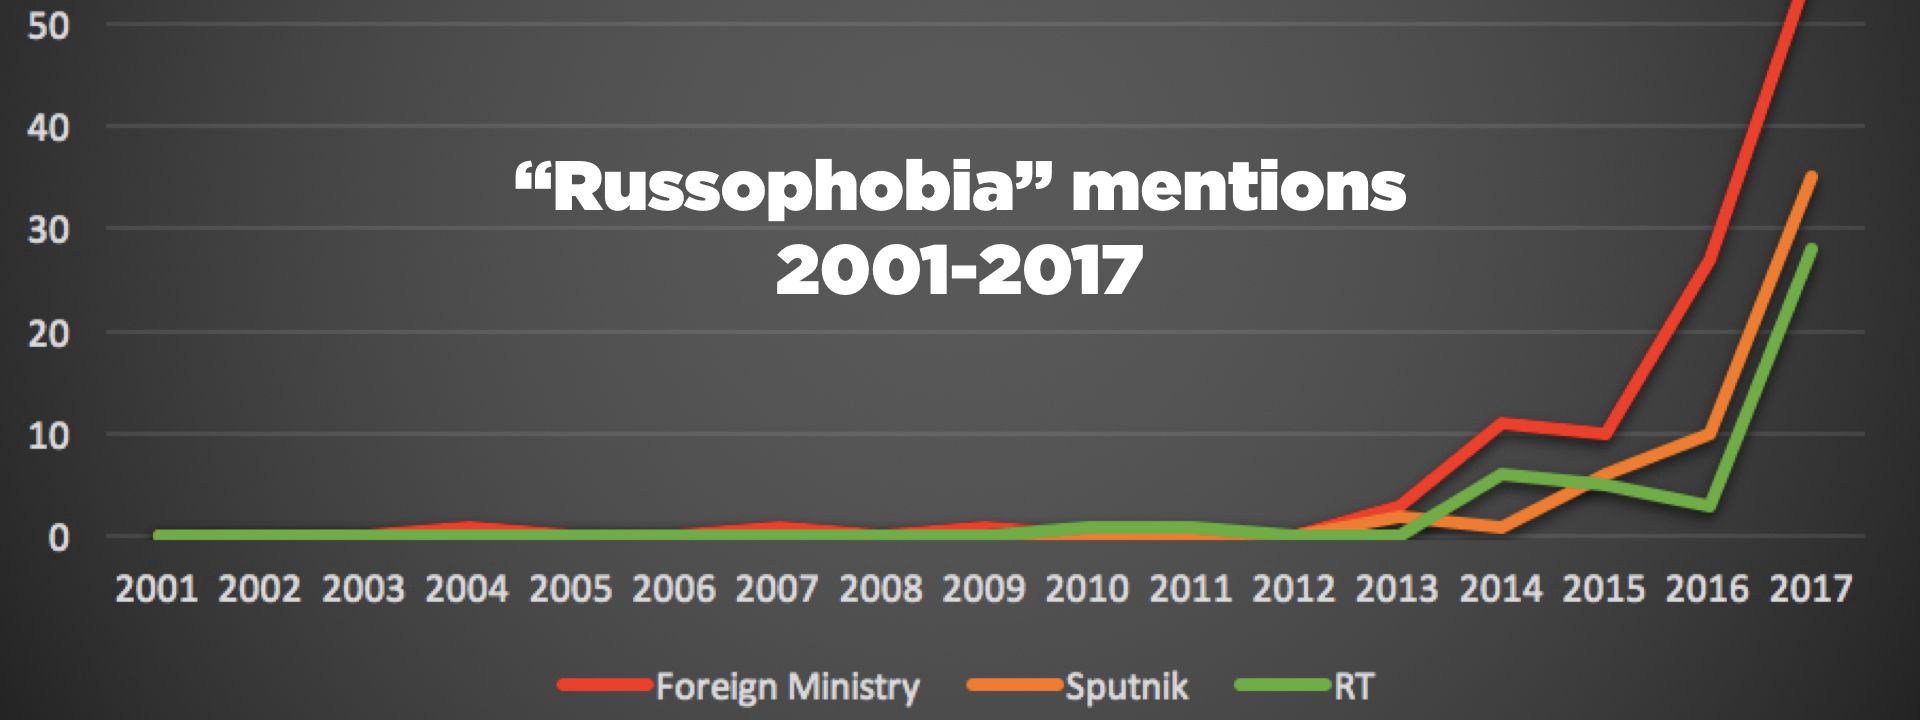 Mentions of “Russophobia” and its variants, 2001–2017. Source: DFRLab, based on the websites of the Russian Foreign Ministry, Sputnik (before 2014 its predecessor, Voice of Russia), and RT. ~